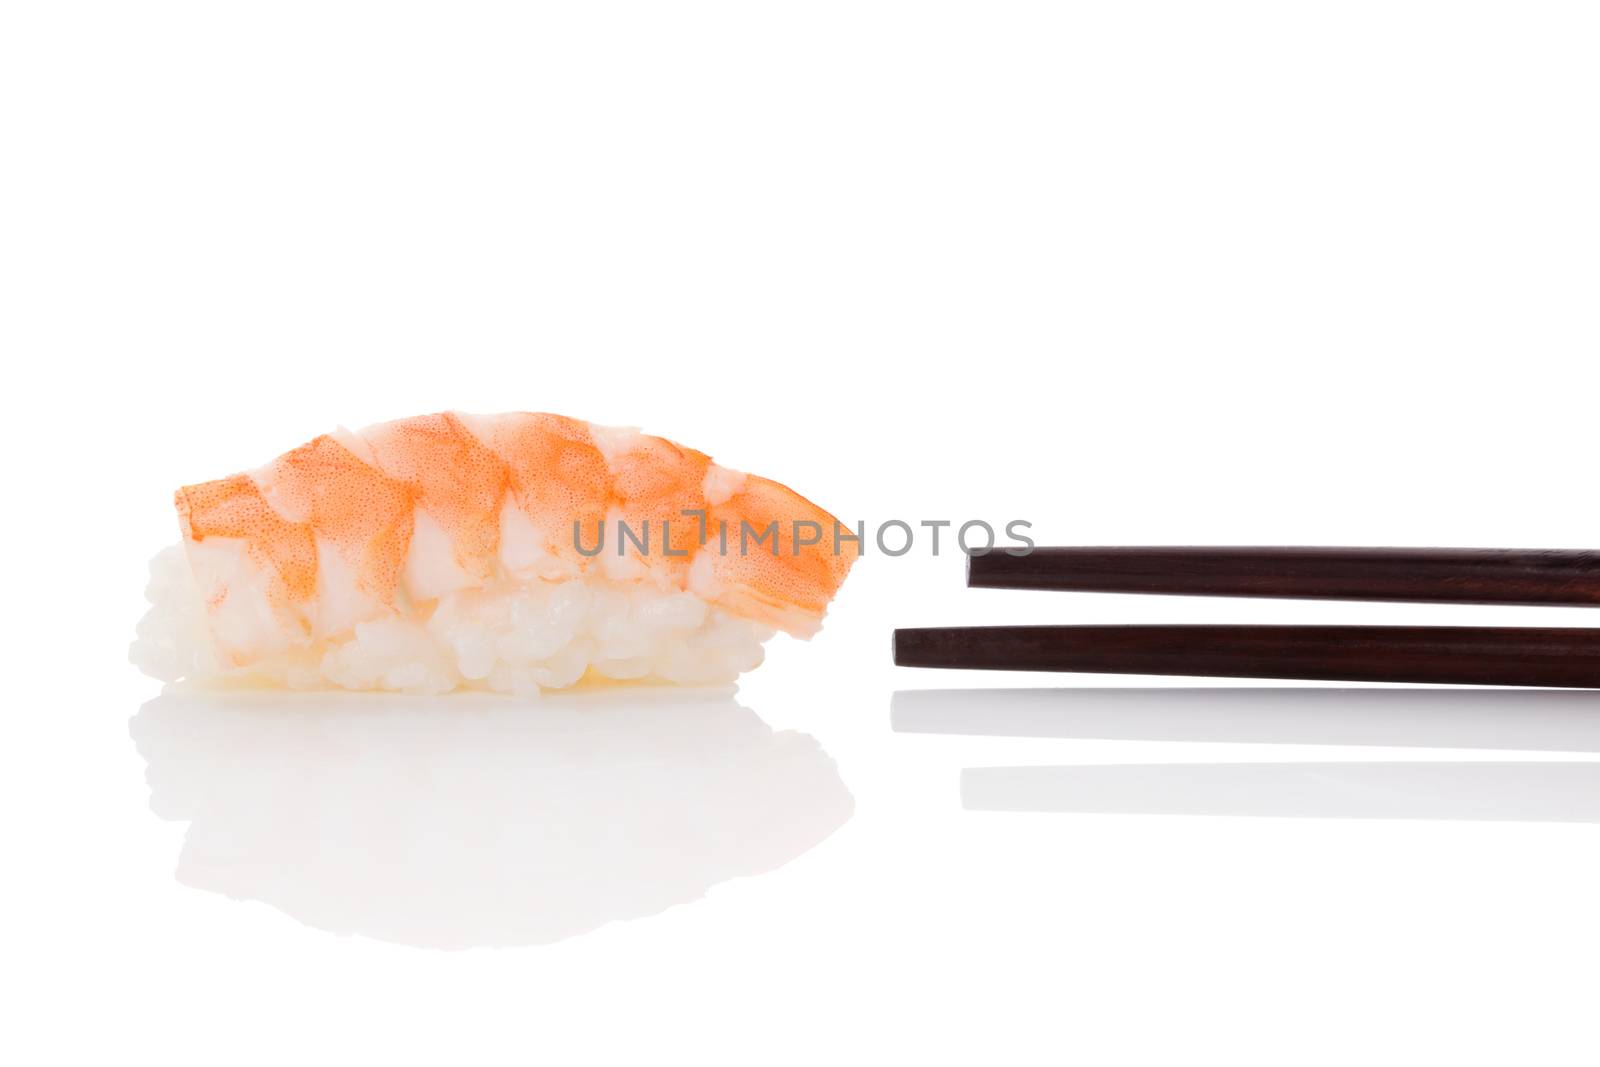 Delicious luxurious nigiri sushi with shrimp and chopsticks isolated on white background. Minimal contemporary asian style.